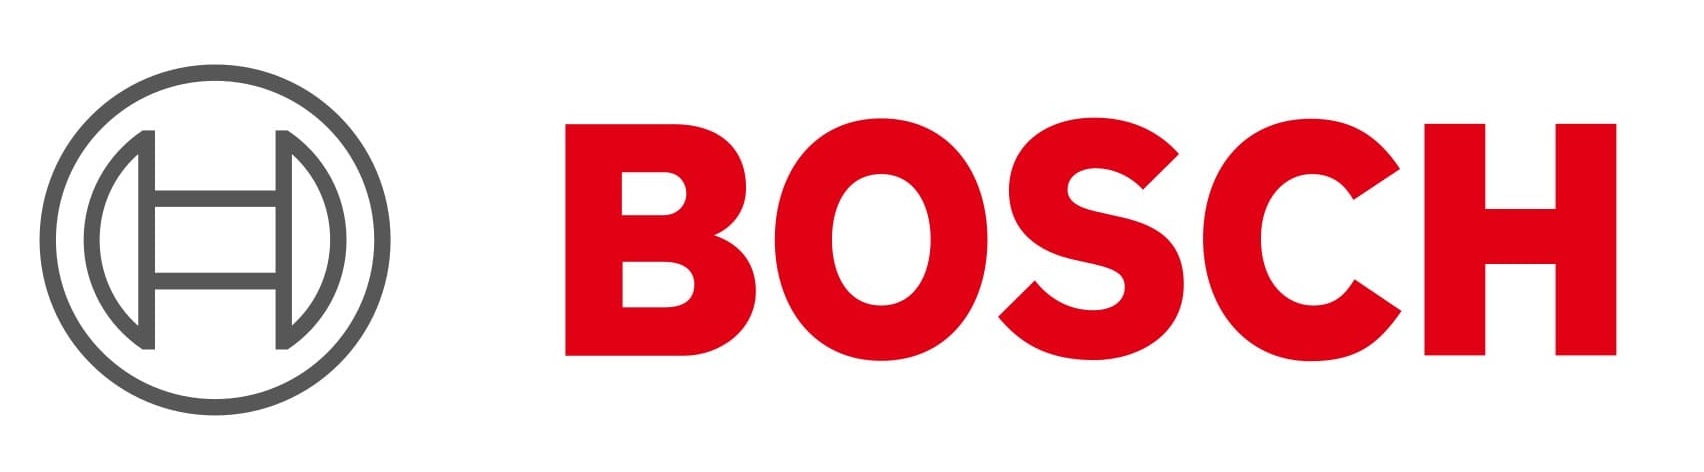 BOSCH Oven Service Near Me, Kenmore Oven Repair